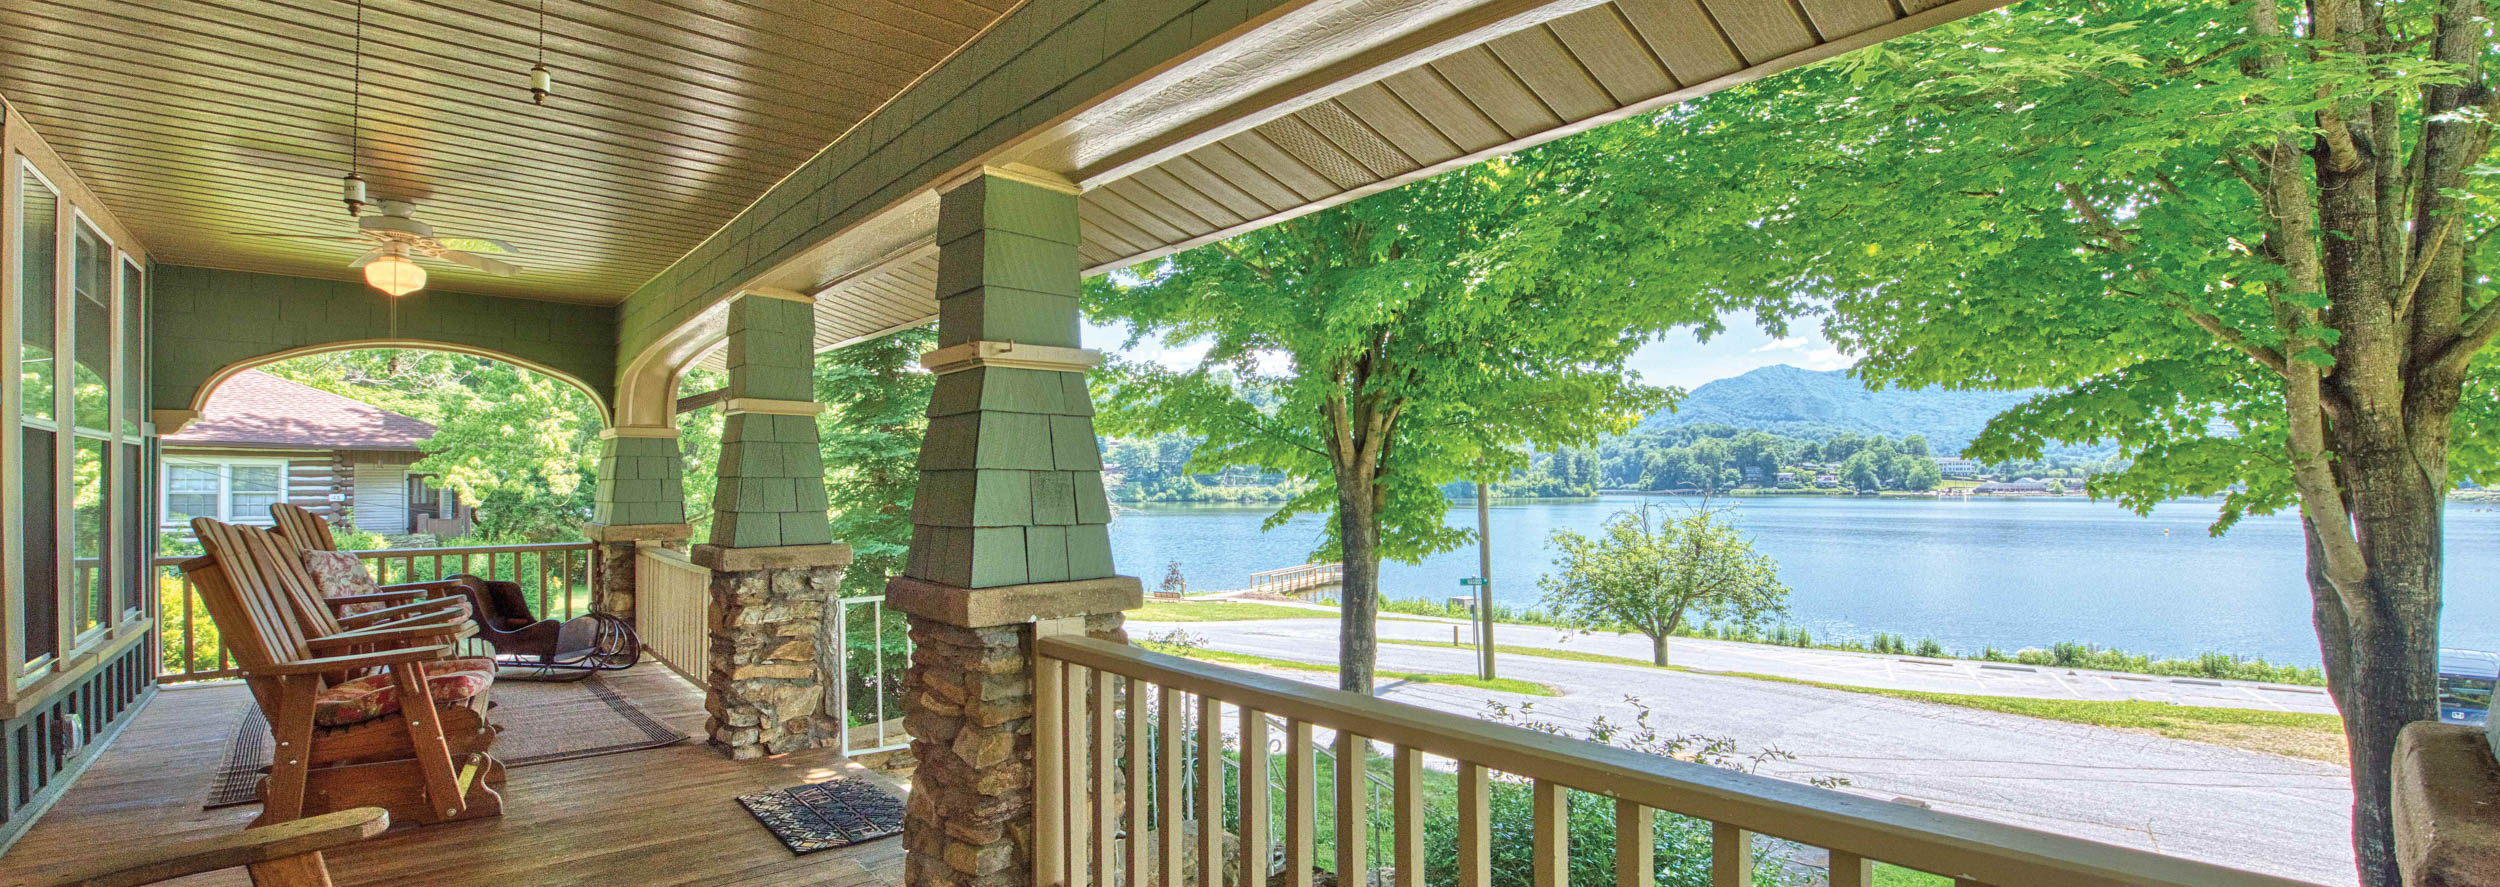 Panoramic view of Lake Junaluska from the porch of a vacation rental home.